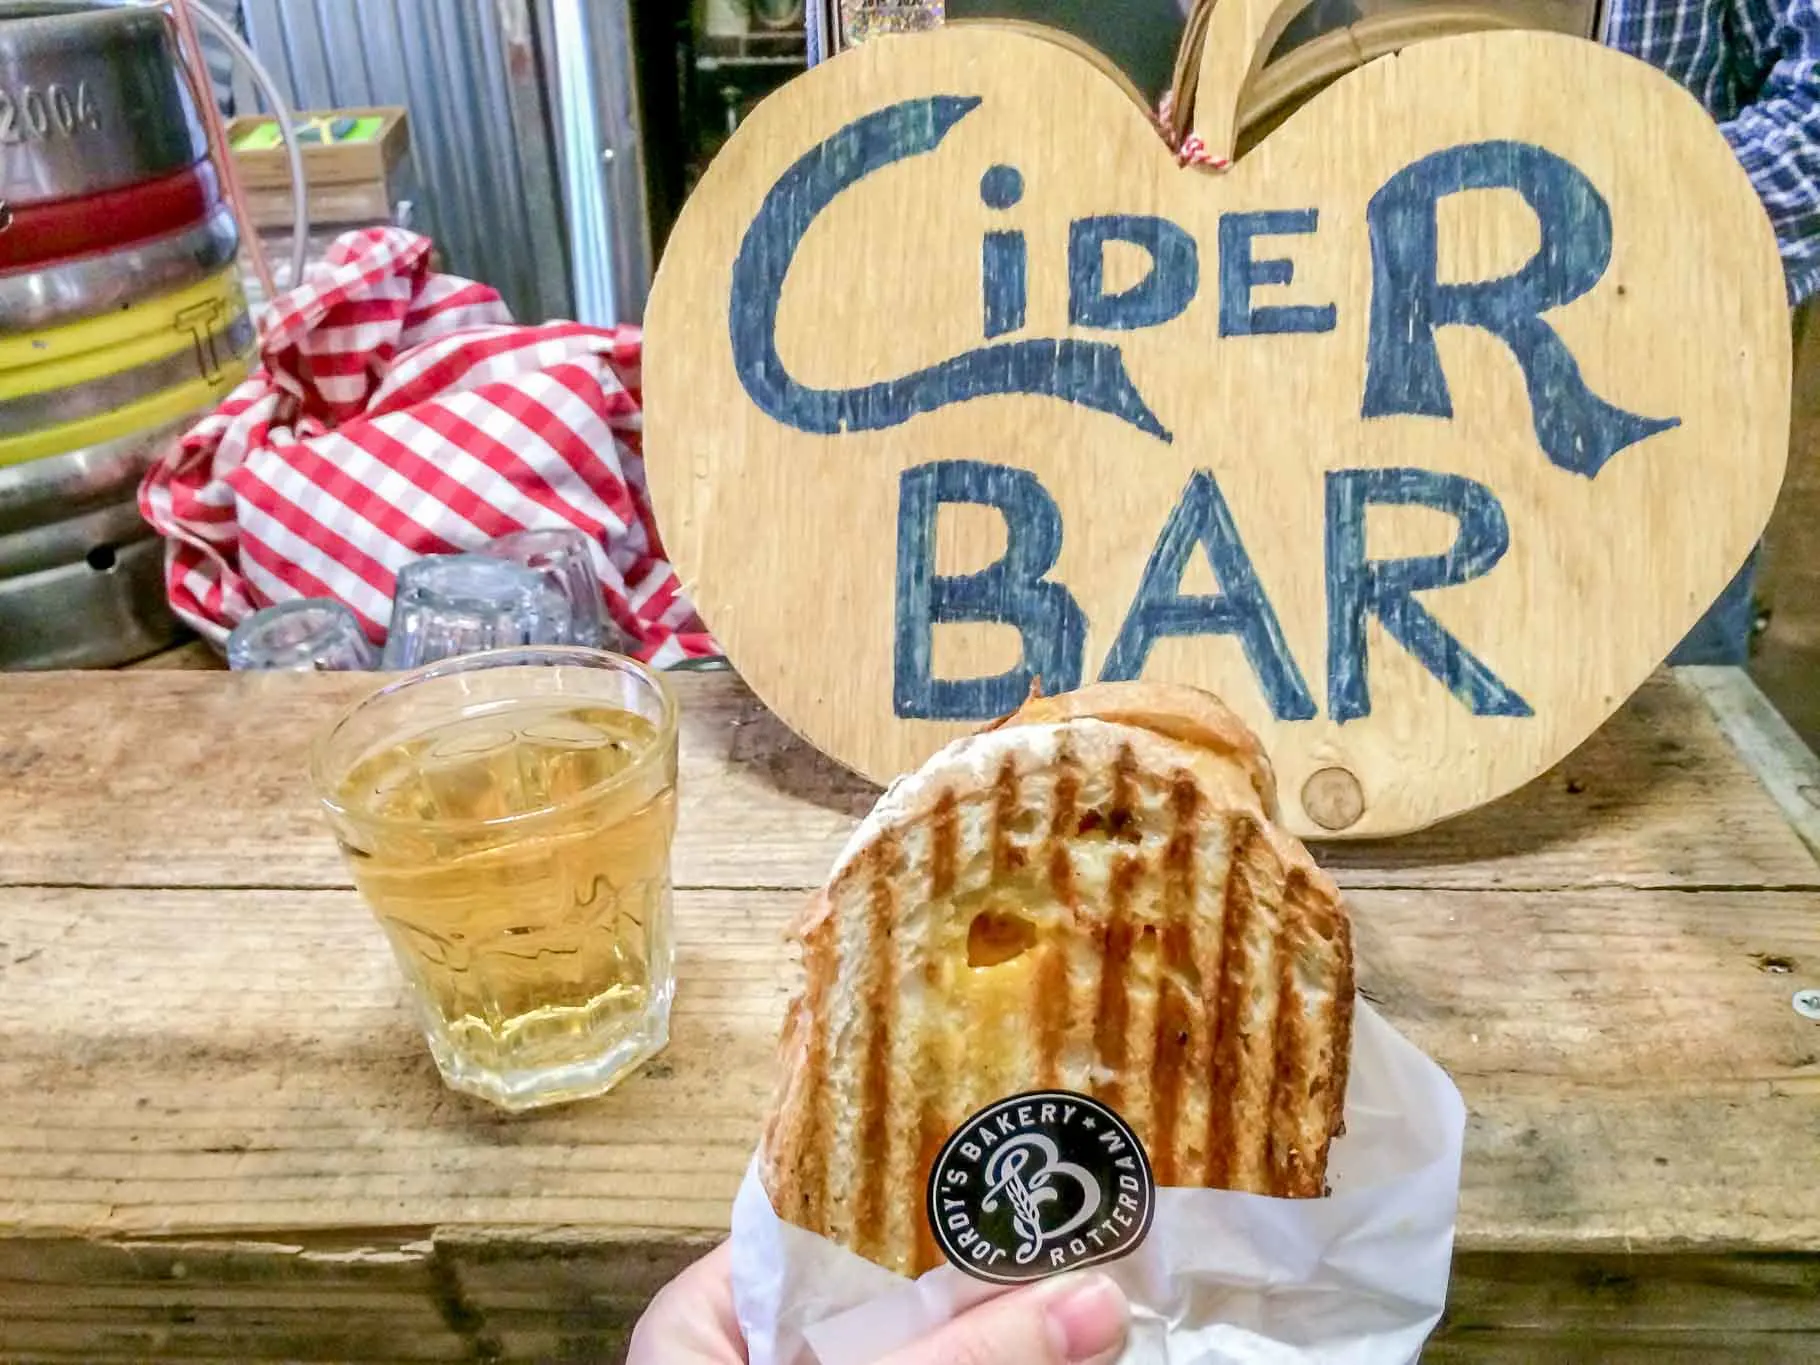 "Cider Bar" sign, sandwich, and drink on a table.